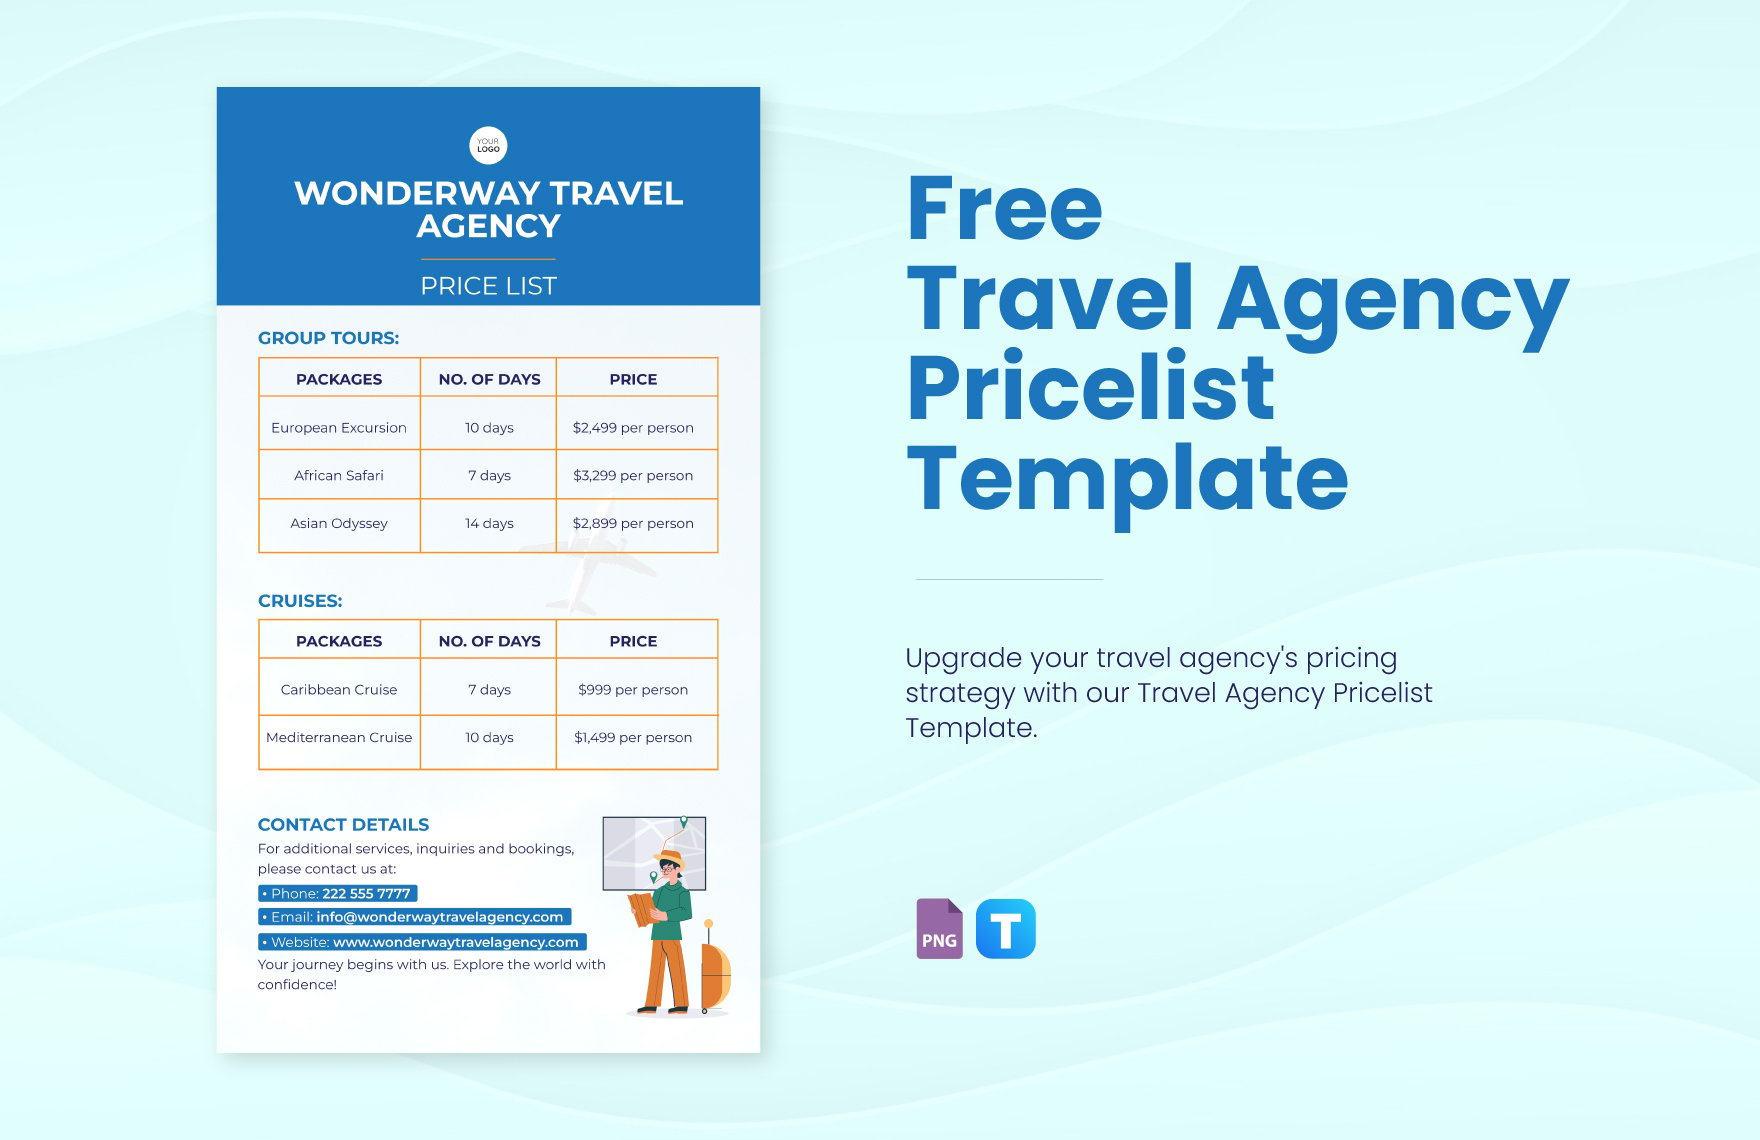 Pricelist Template in PNG - Download | Template.net